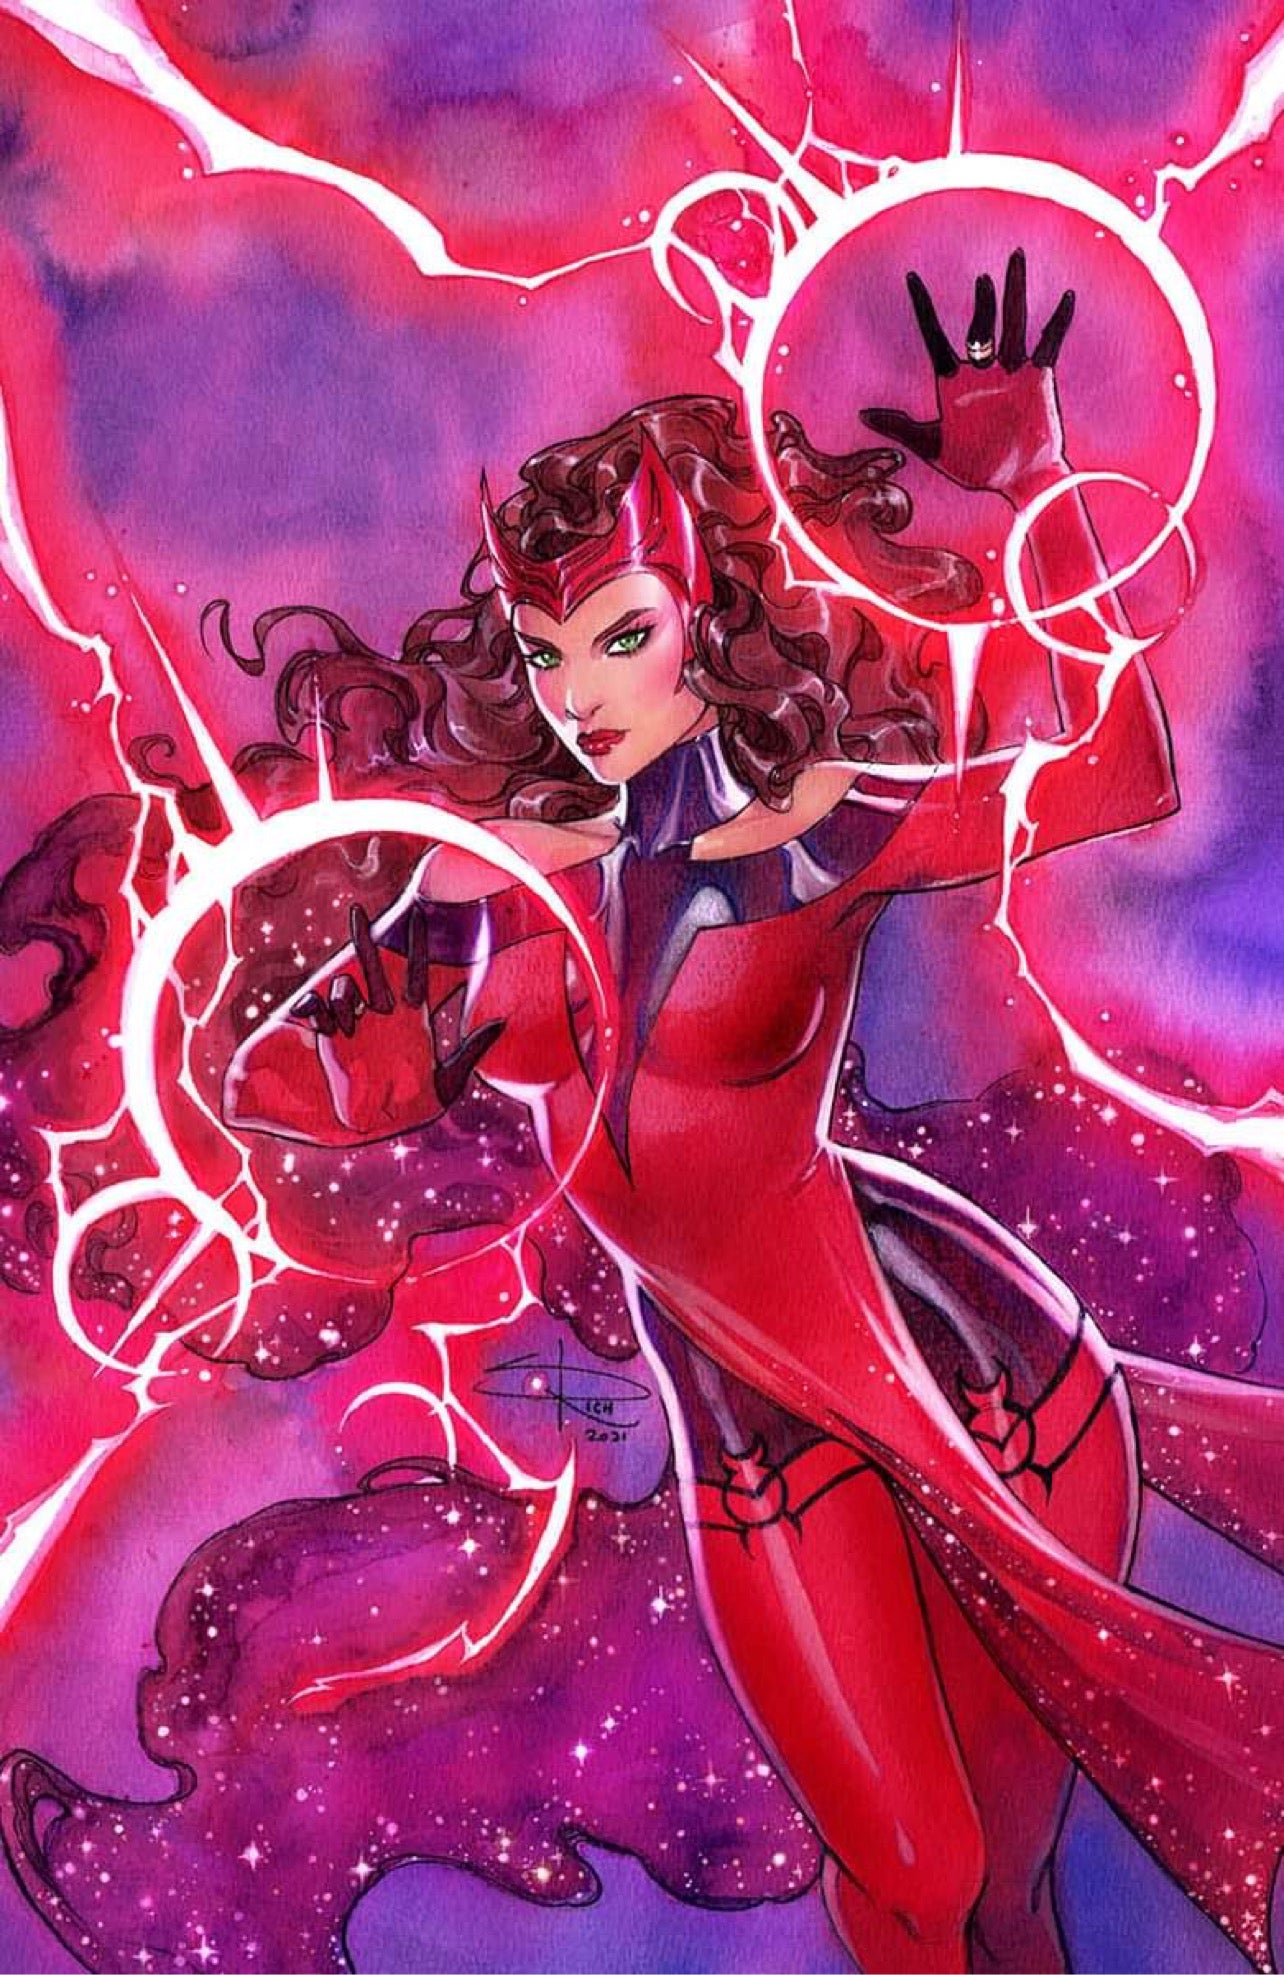 Scarlet Witch (2023) #8 (Variant), Comic Issues